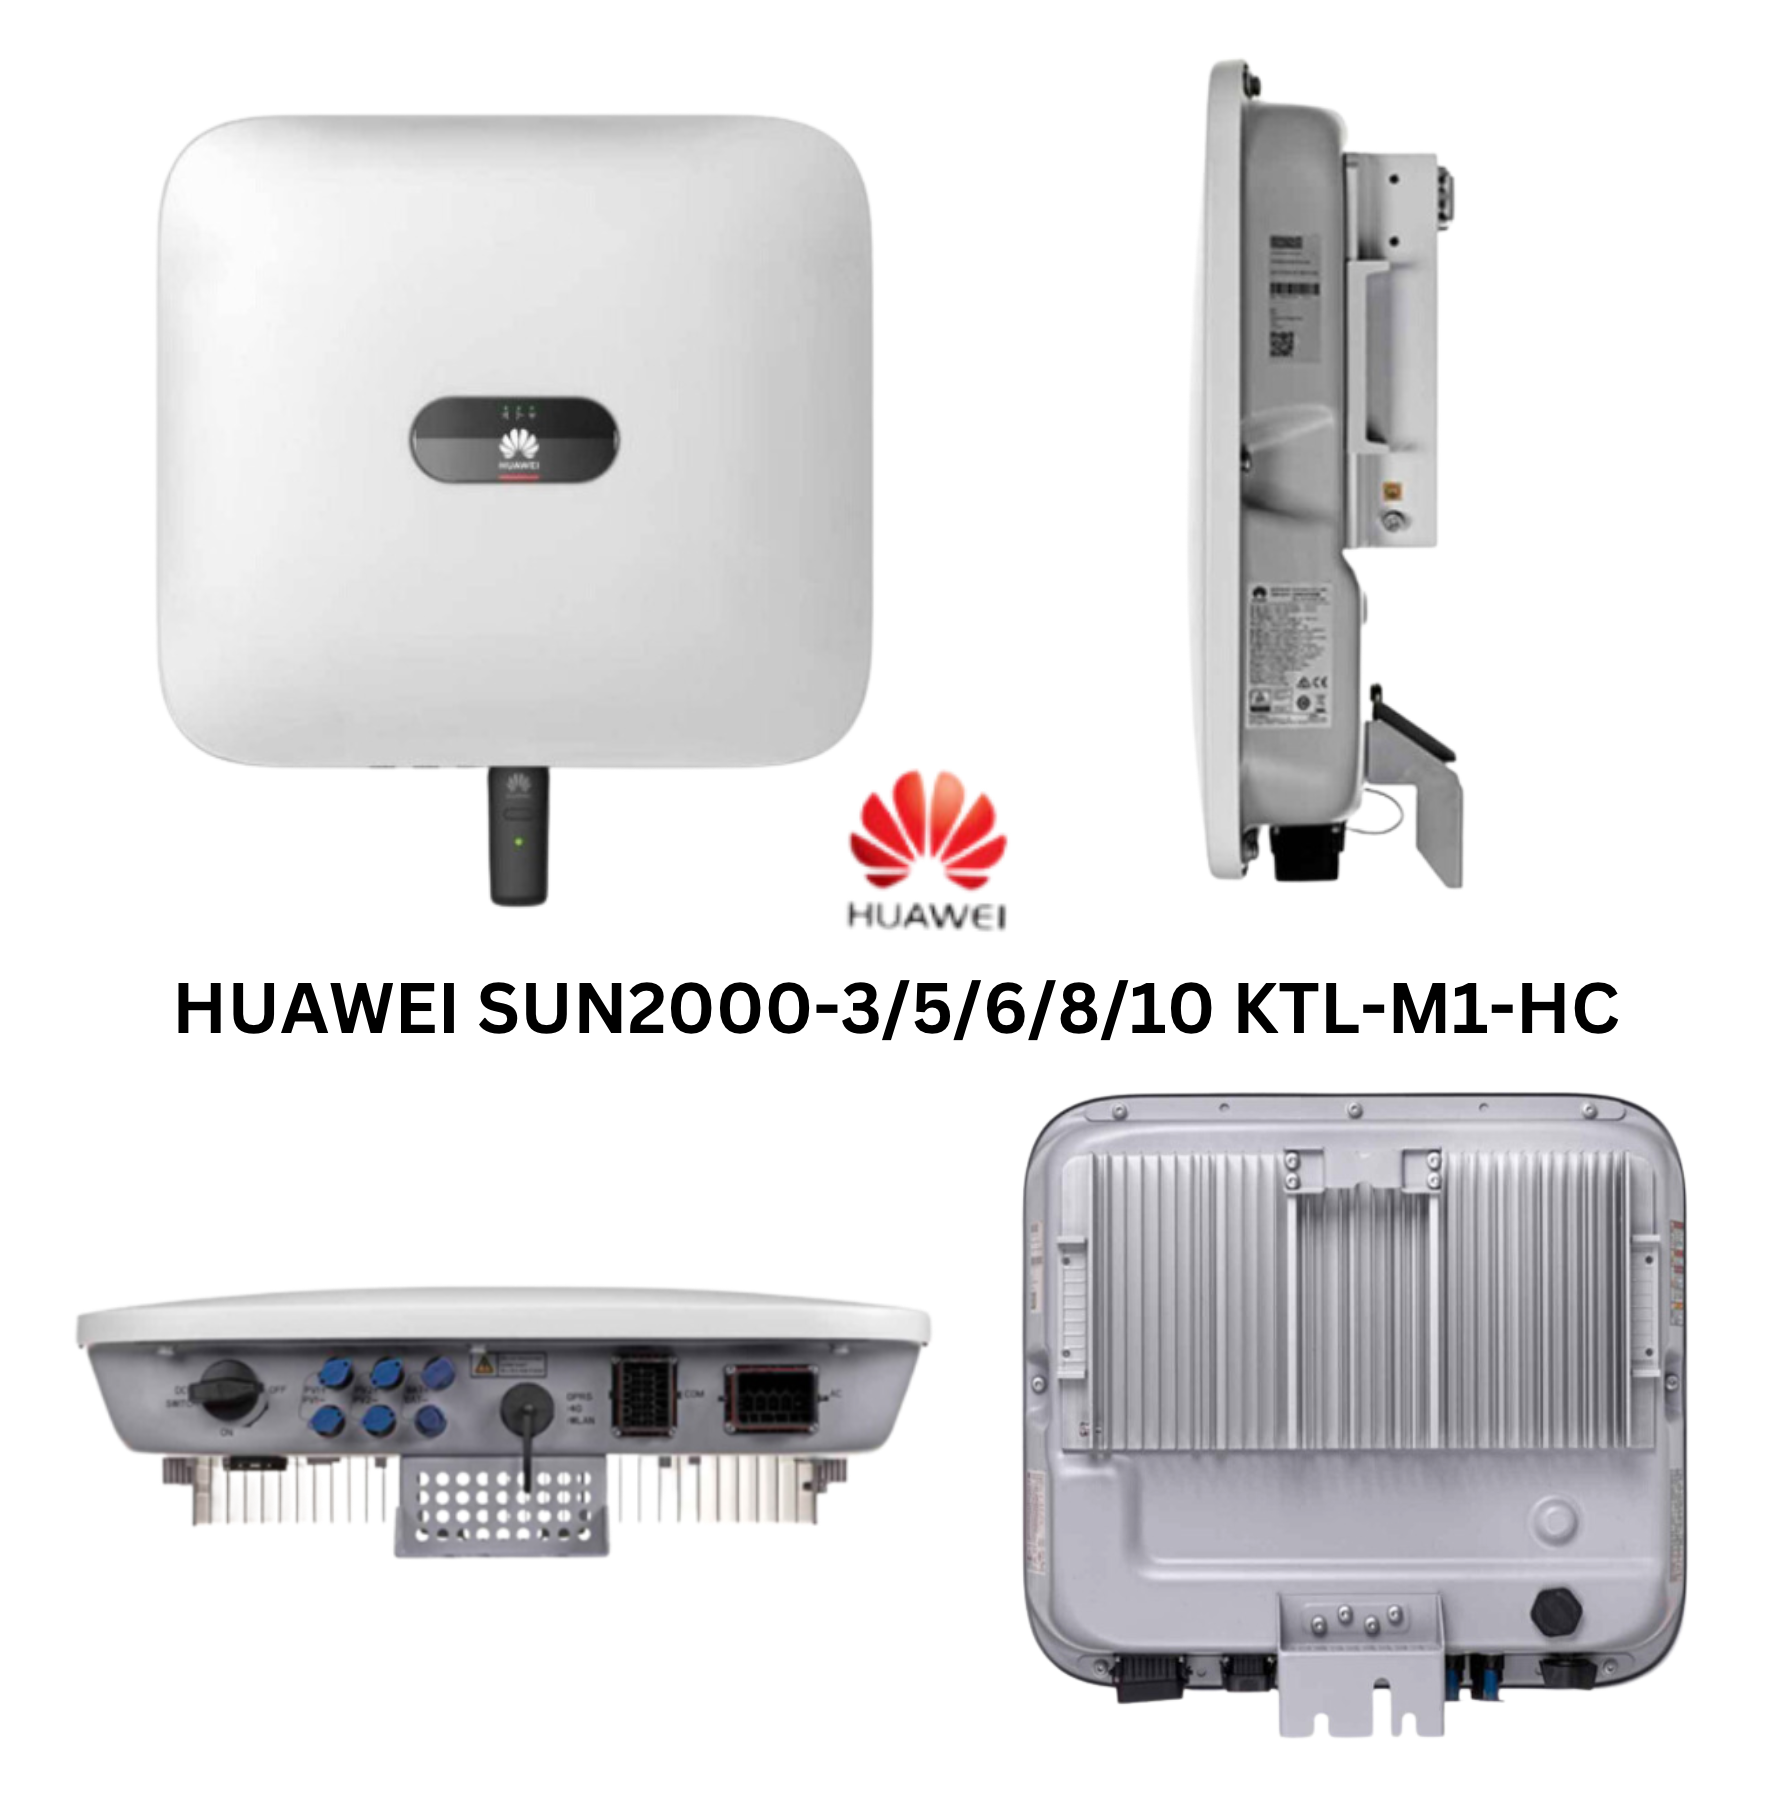 Huawei Complete PV-System Set - [5kW + 5kWh]